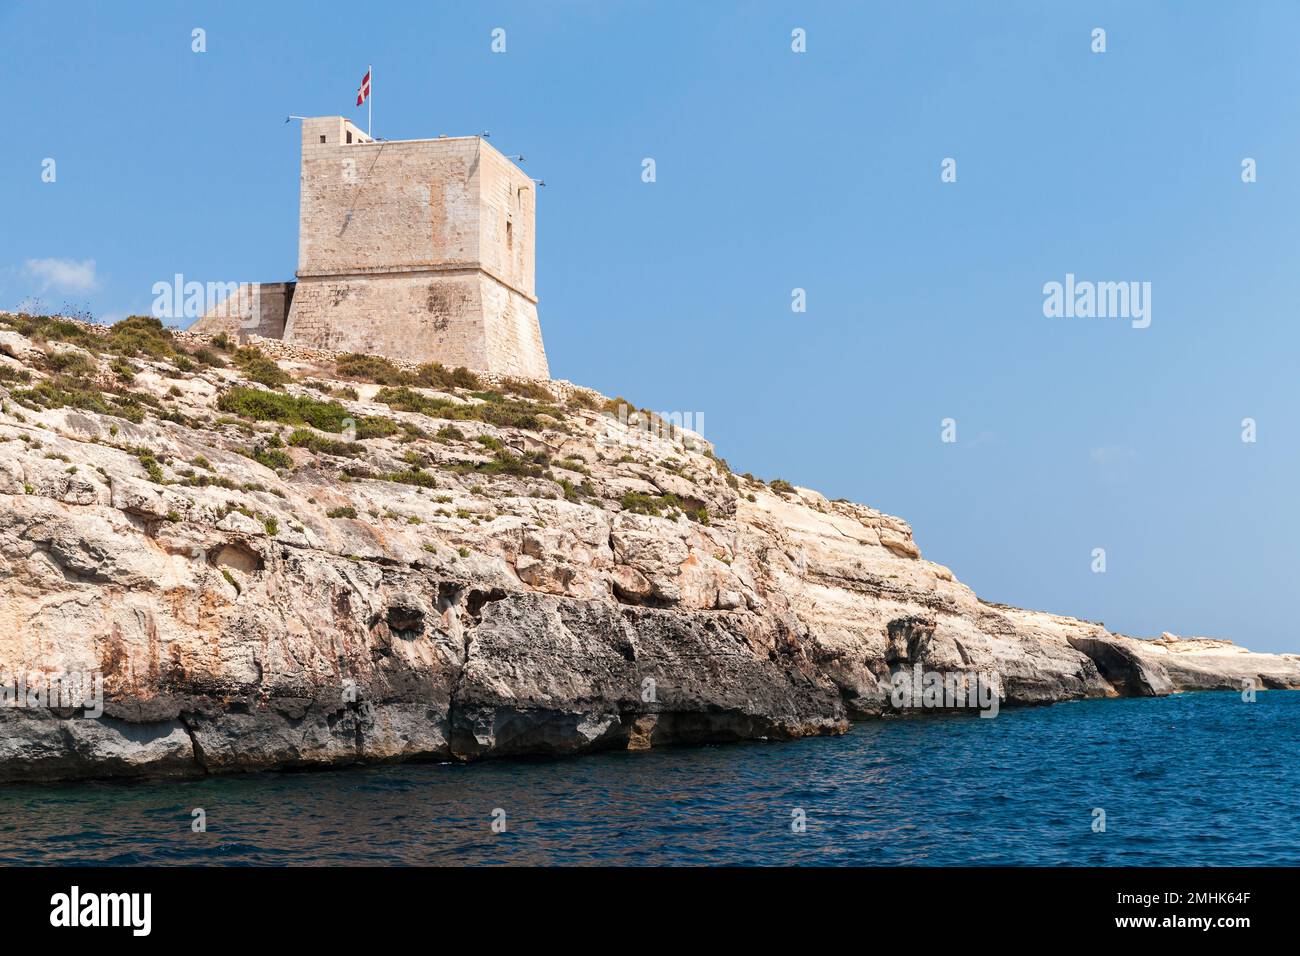 Maltese coastal landscape with Mgarr ix-Xini Tower, the largest of the coastal watchtowers that the Knights of Malta erected on the island of Gozo Stock Photo